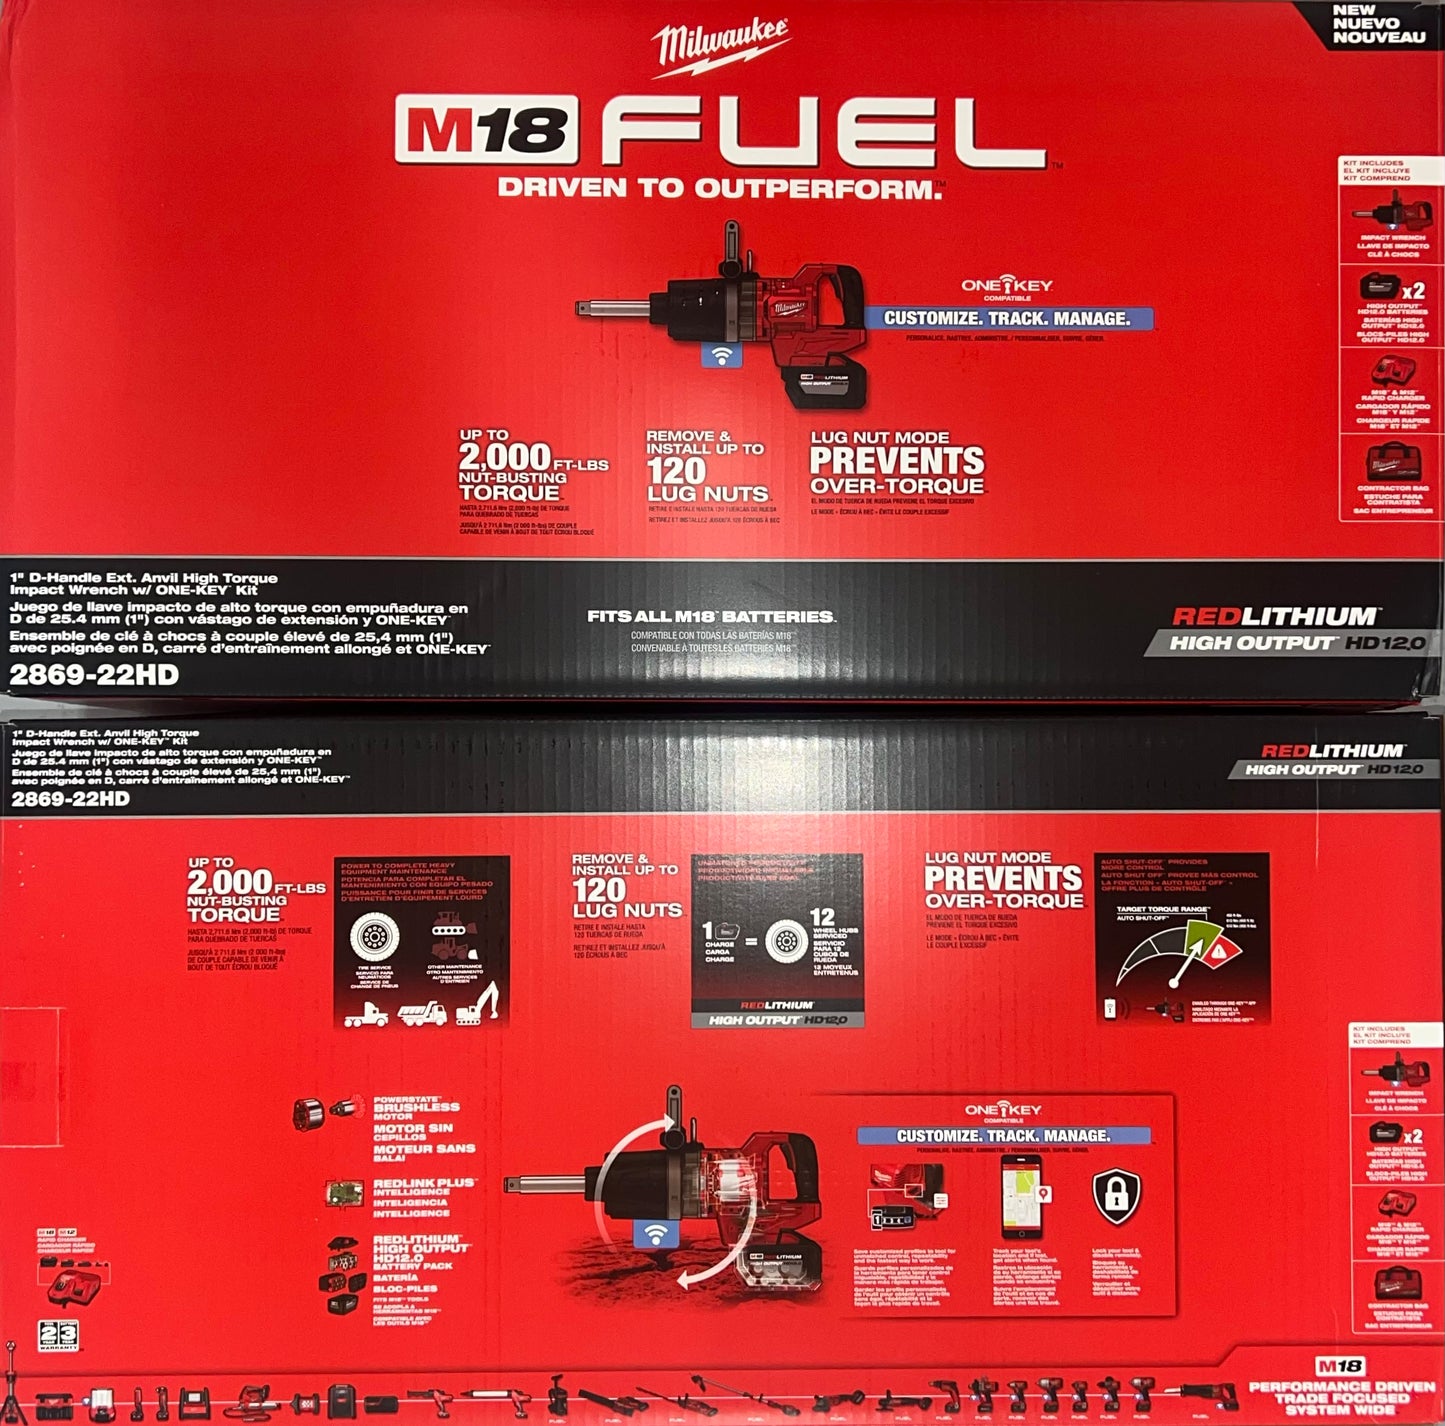 Milwaukee M18 Fuel 1” Extended Anvil High Torque Impact Wrench w/One Key Kit. Model #2869-22HD